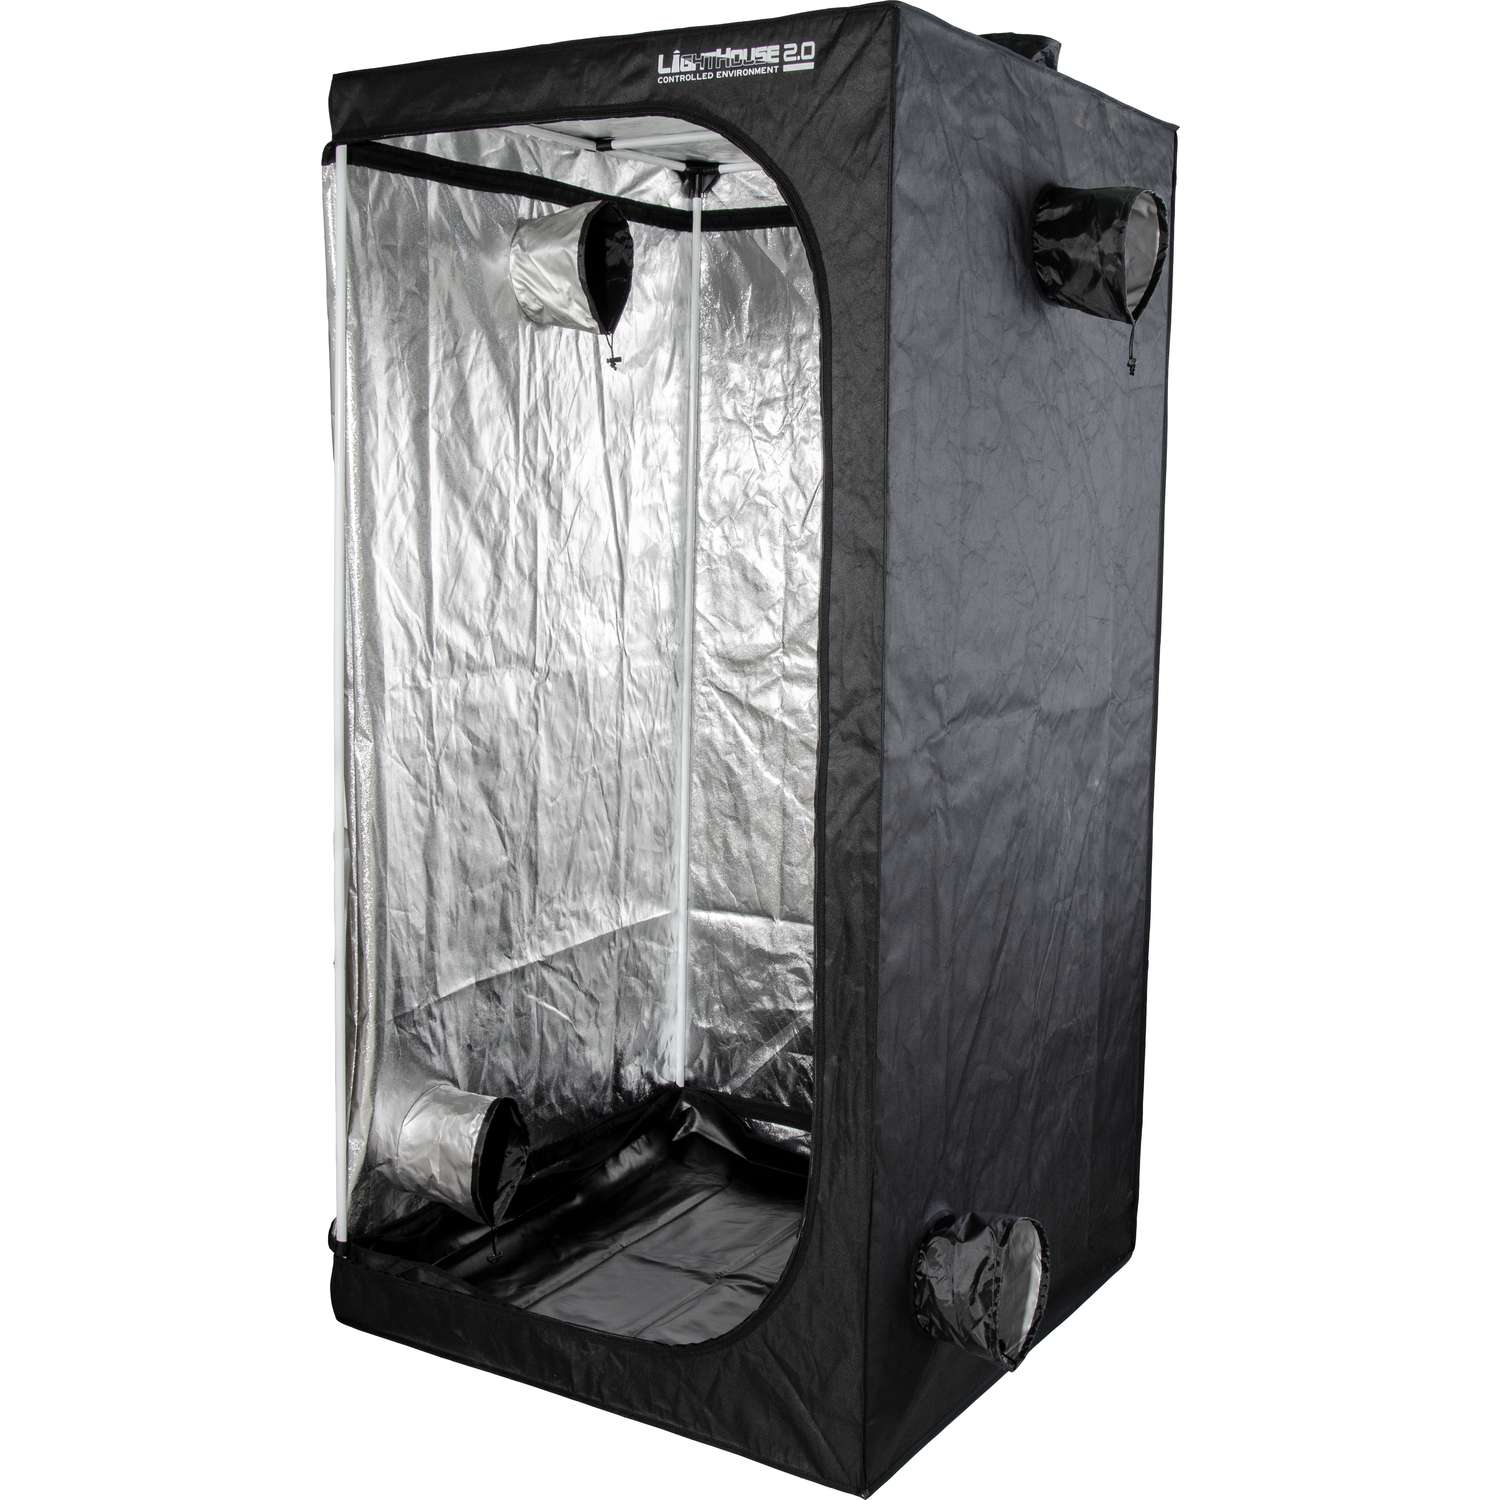 How To Handle Excessive Grow Tent Heat - Hydrobuilder Learning Center